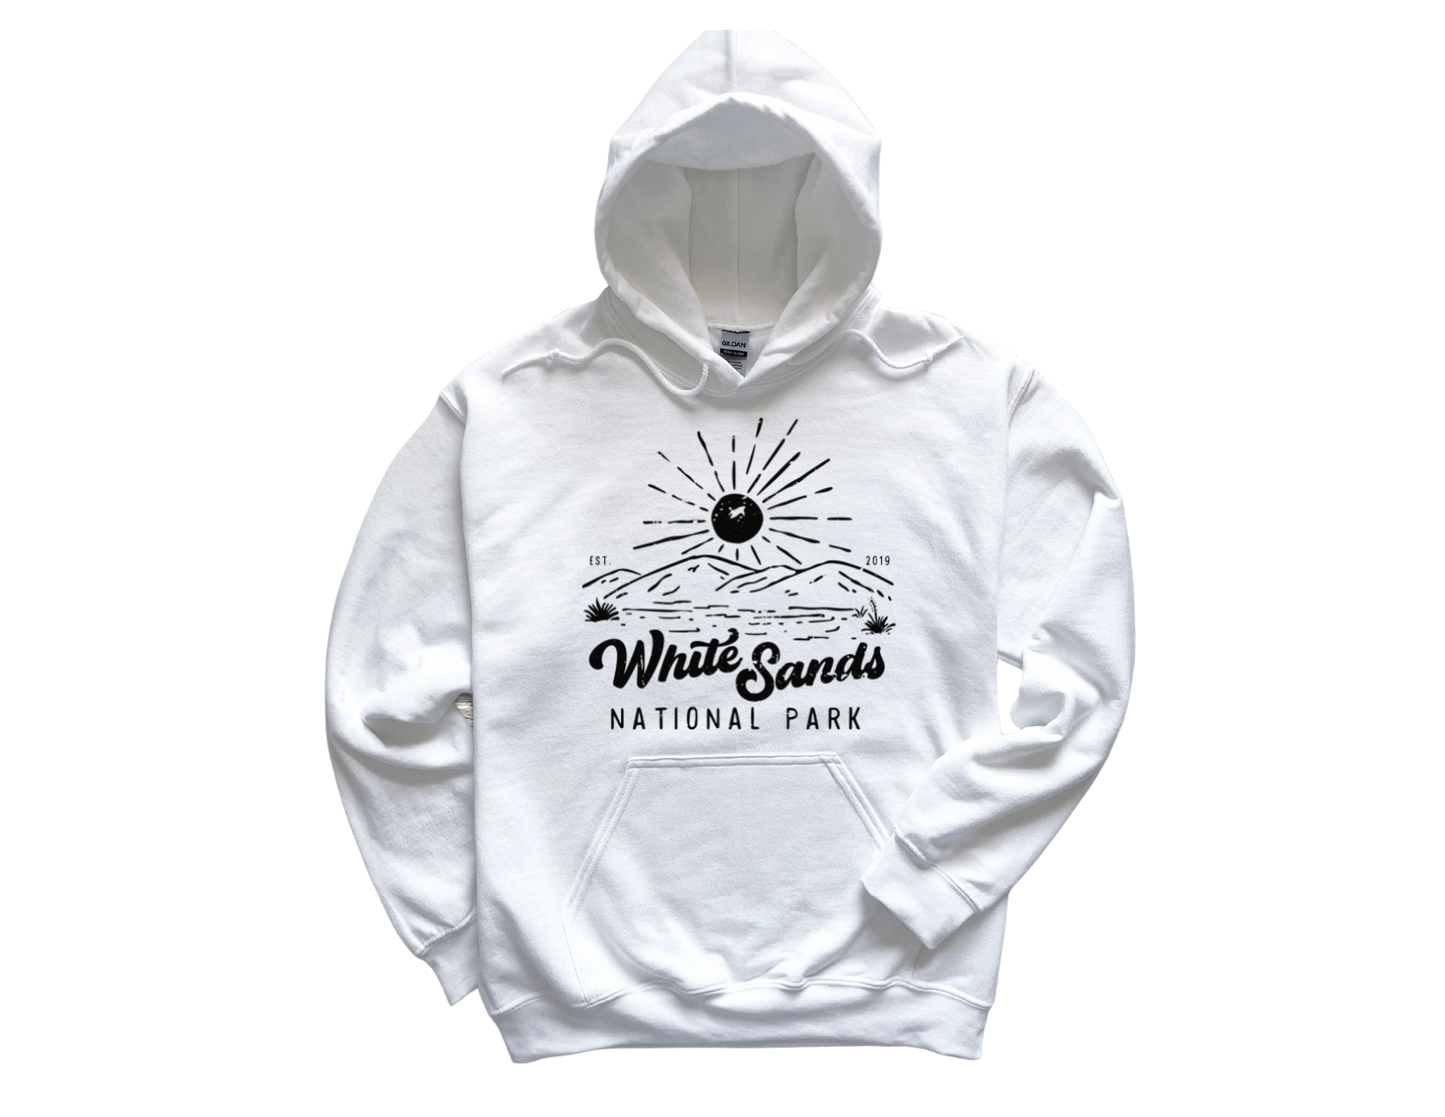 White Sands National Park Unisex Hoodie